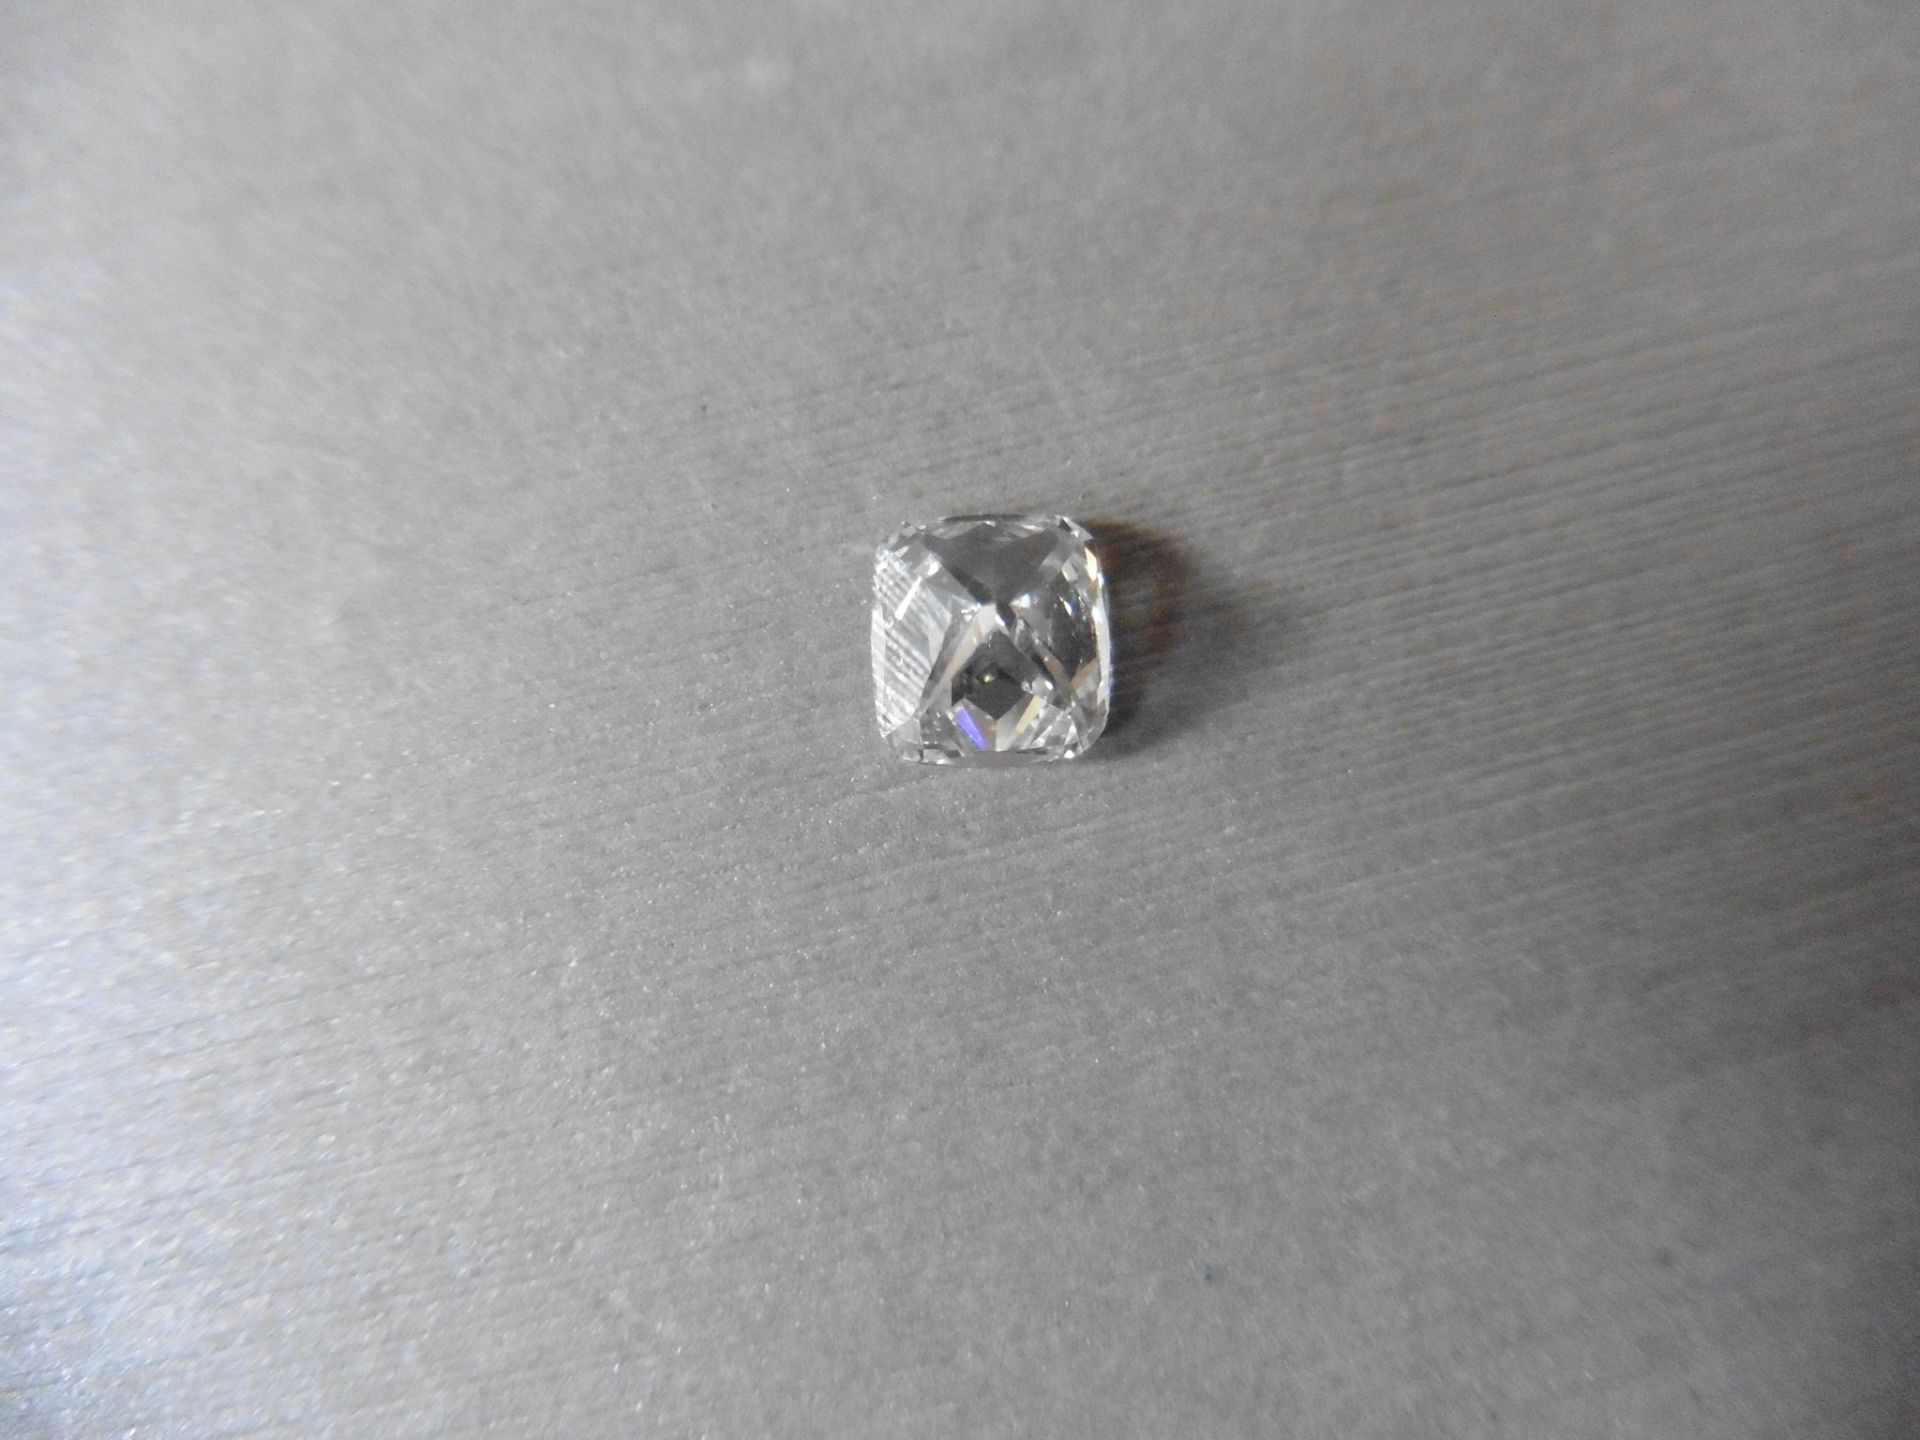 1.21ct cushion cut diamond, F colour and VS2 clarity. Measures 6.54 x 6.06 x 4.15mm. GIA certificate - Image 4 of 6